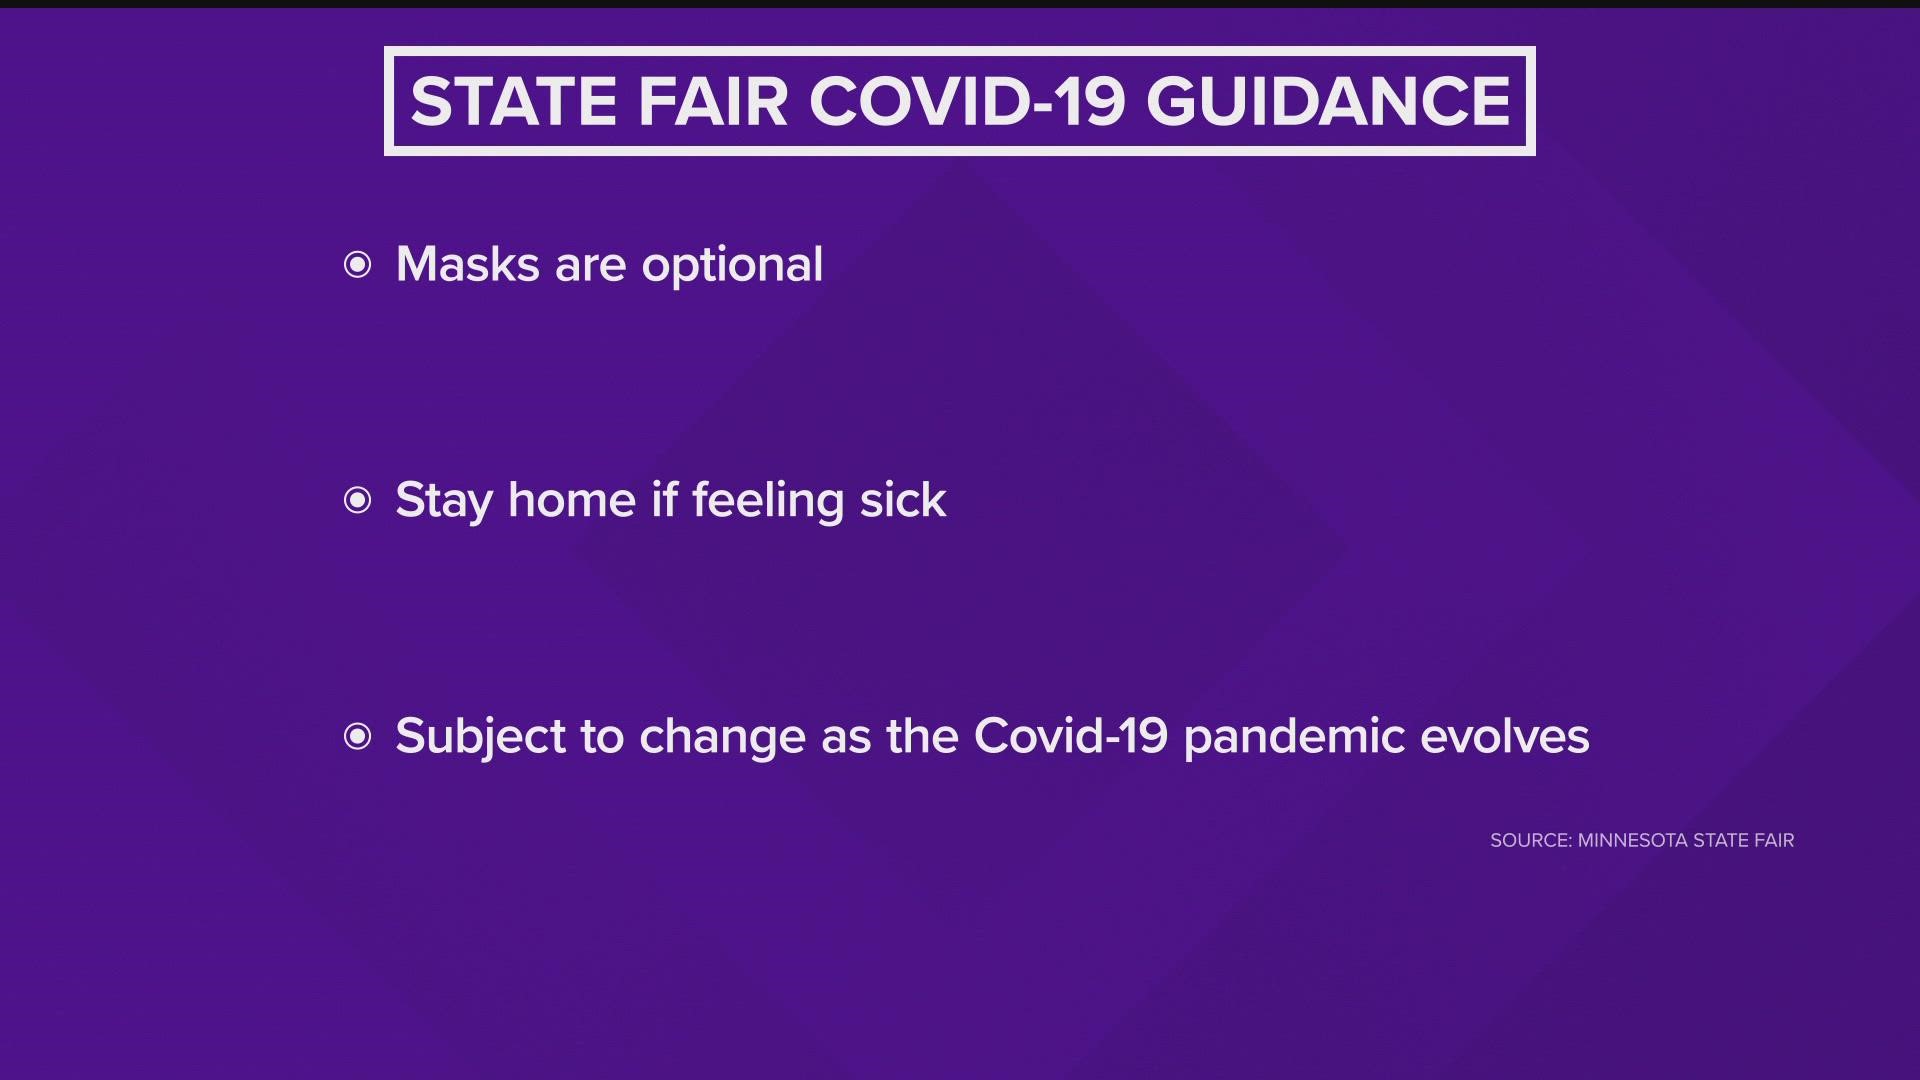 The fair says masks are optional, but you should stay home if you feel sick.